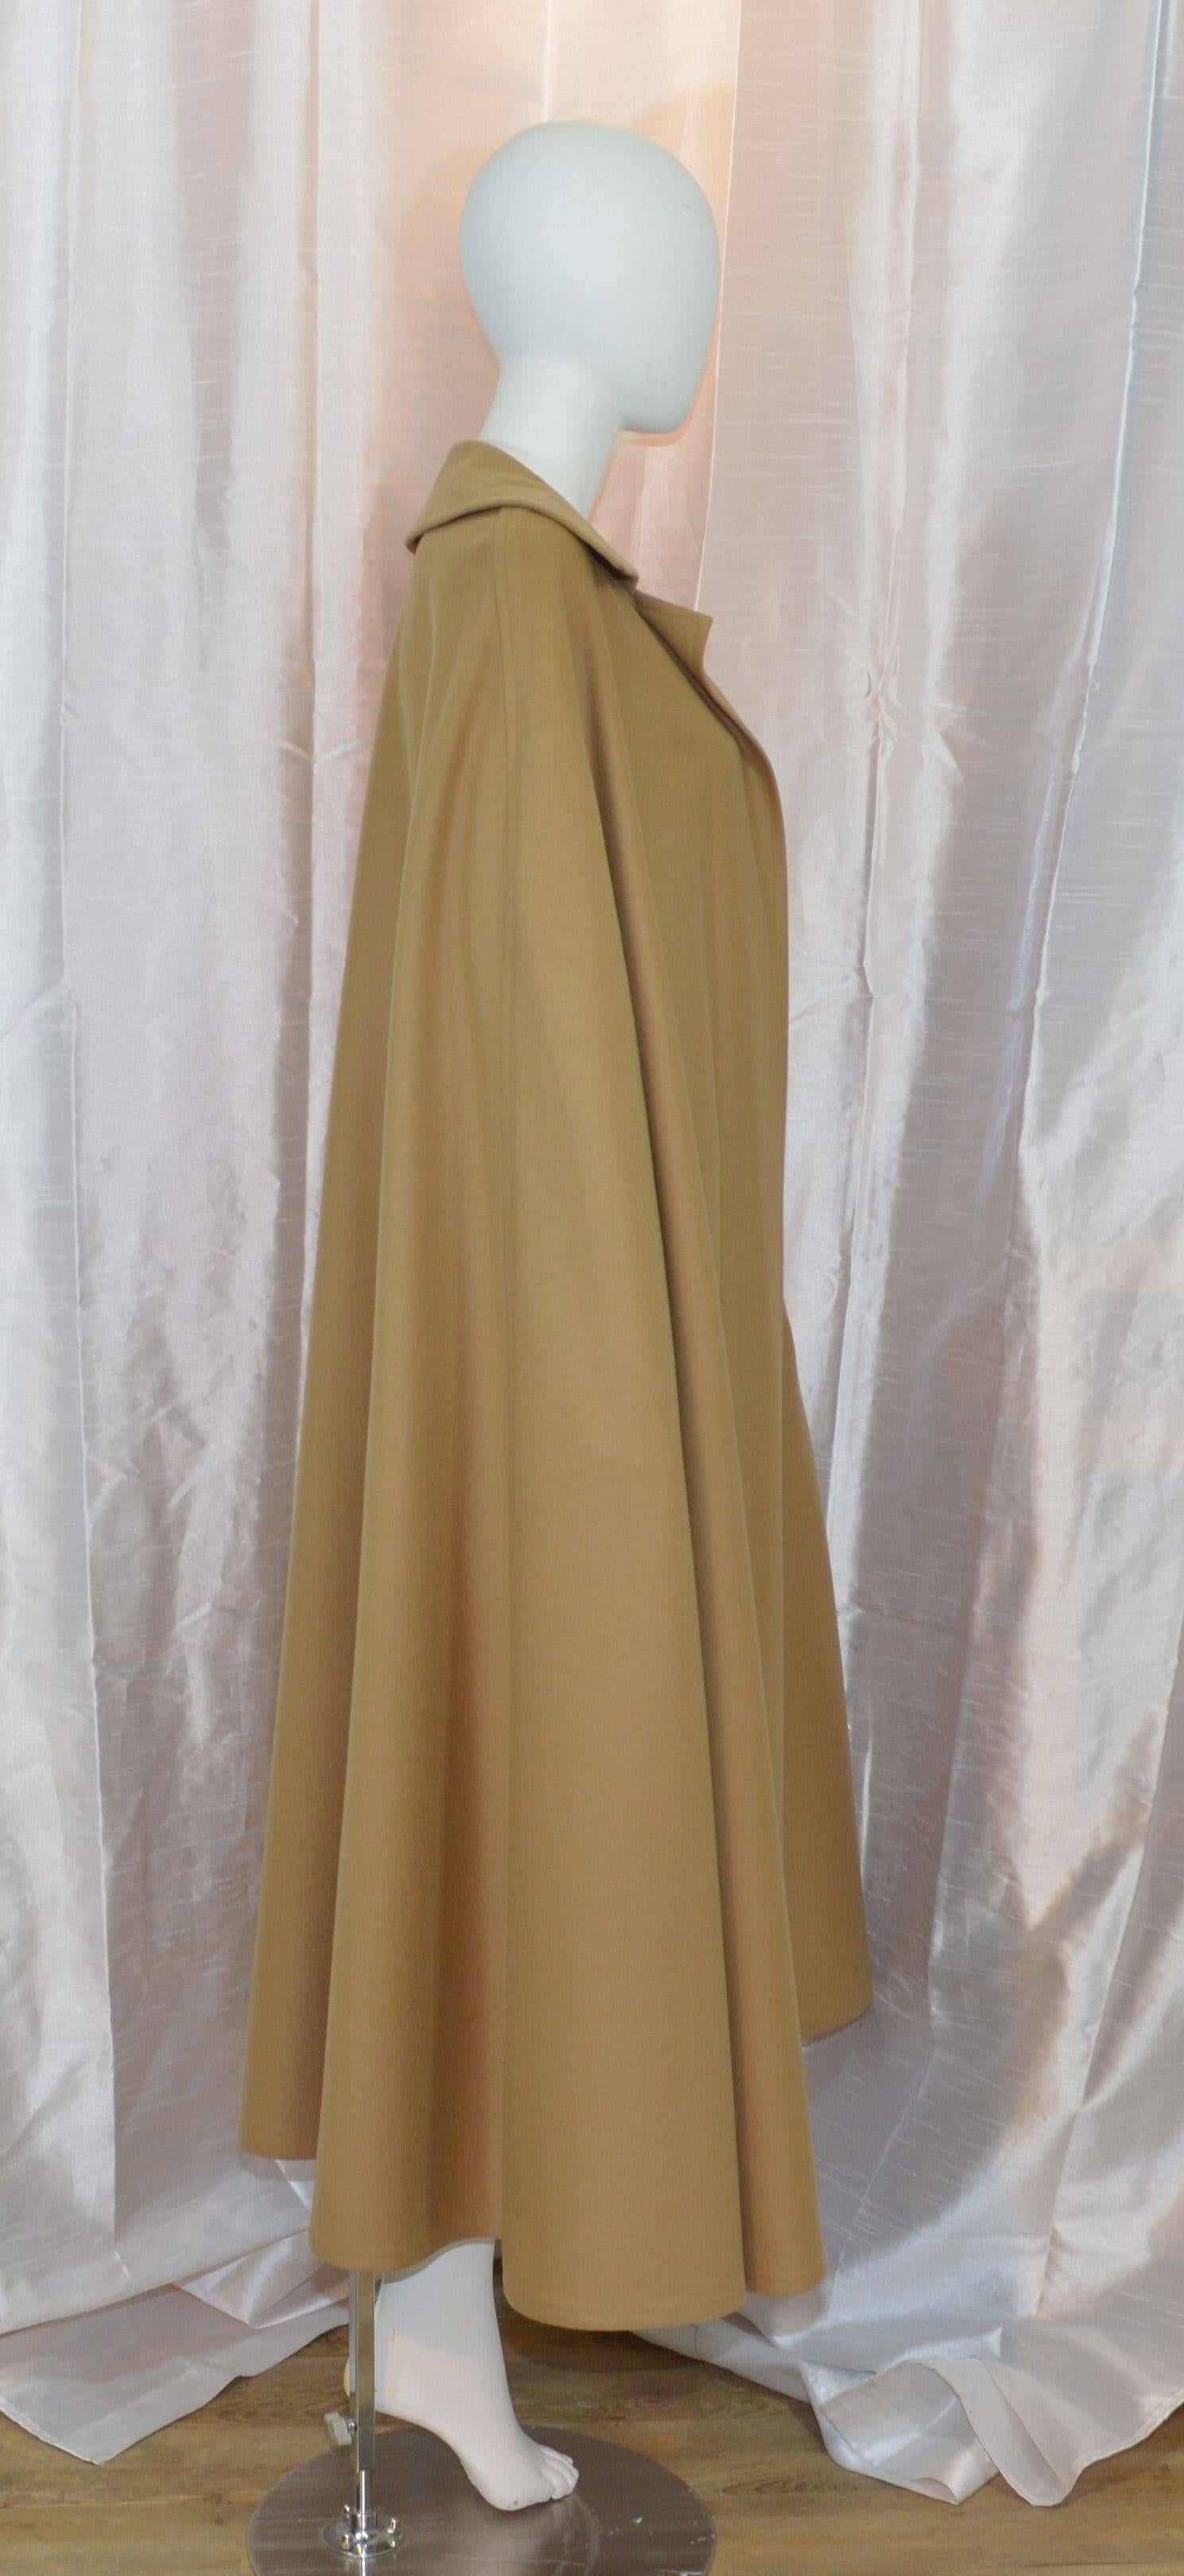 Iconic Vintage Yves Saint Laurent 1970s cape featured in camel color, made of 100% wool, unlined, labeled size 42, and made in France. Length measures: 51''